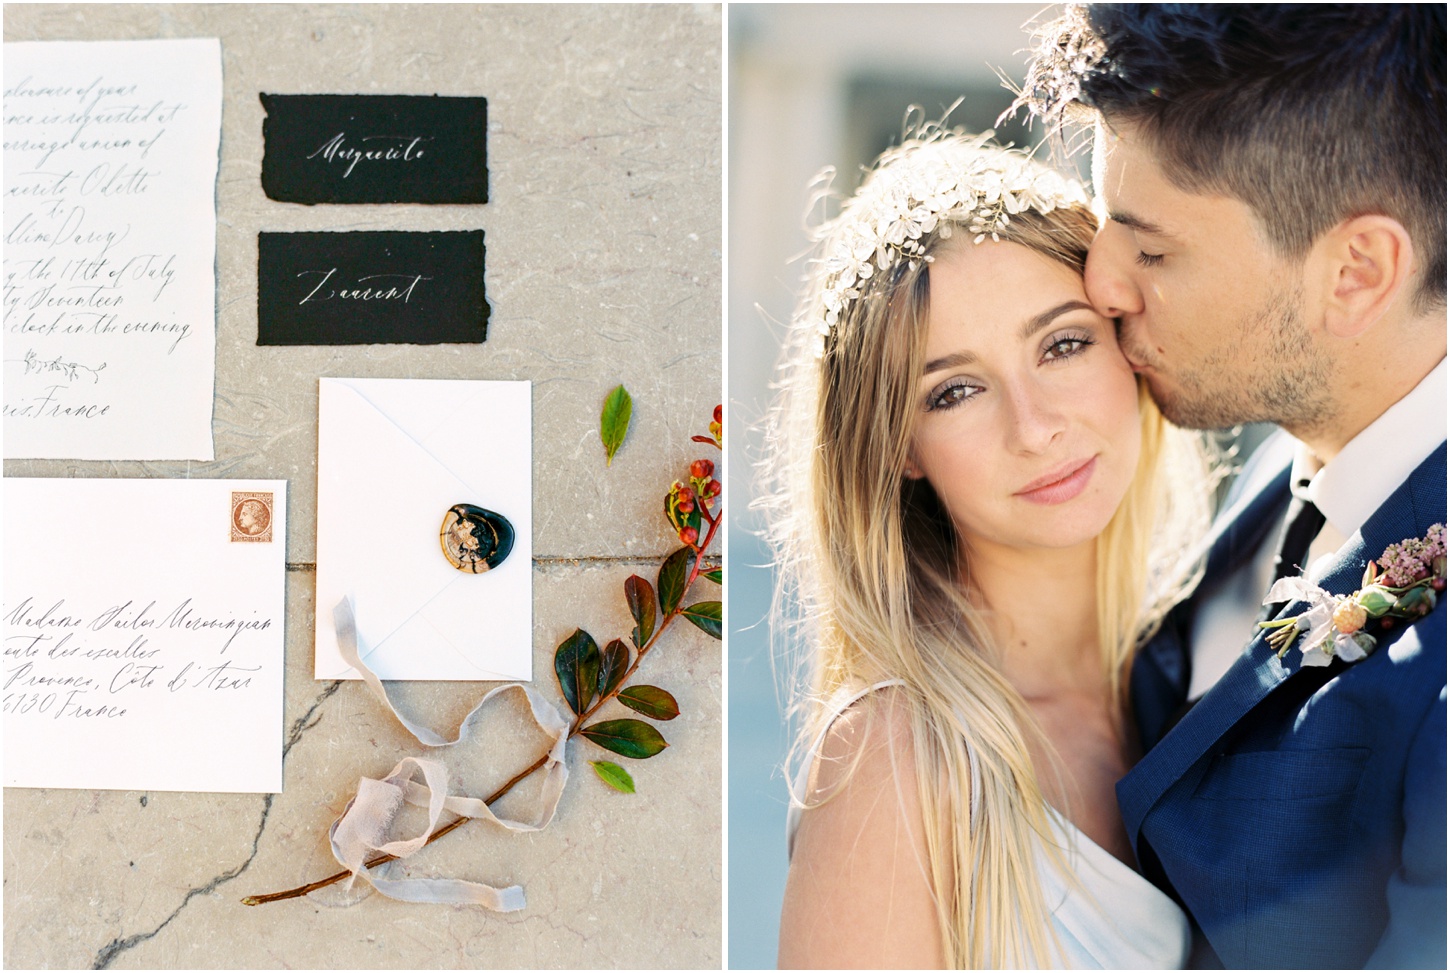 Olive Juice Press did a beautiful job on the invitation suite and Alice and Mae bridal made the headpiece!